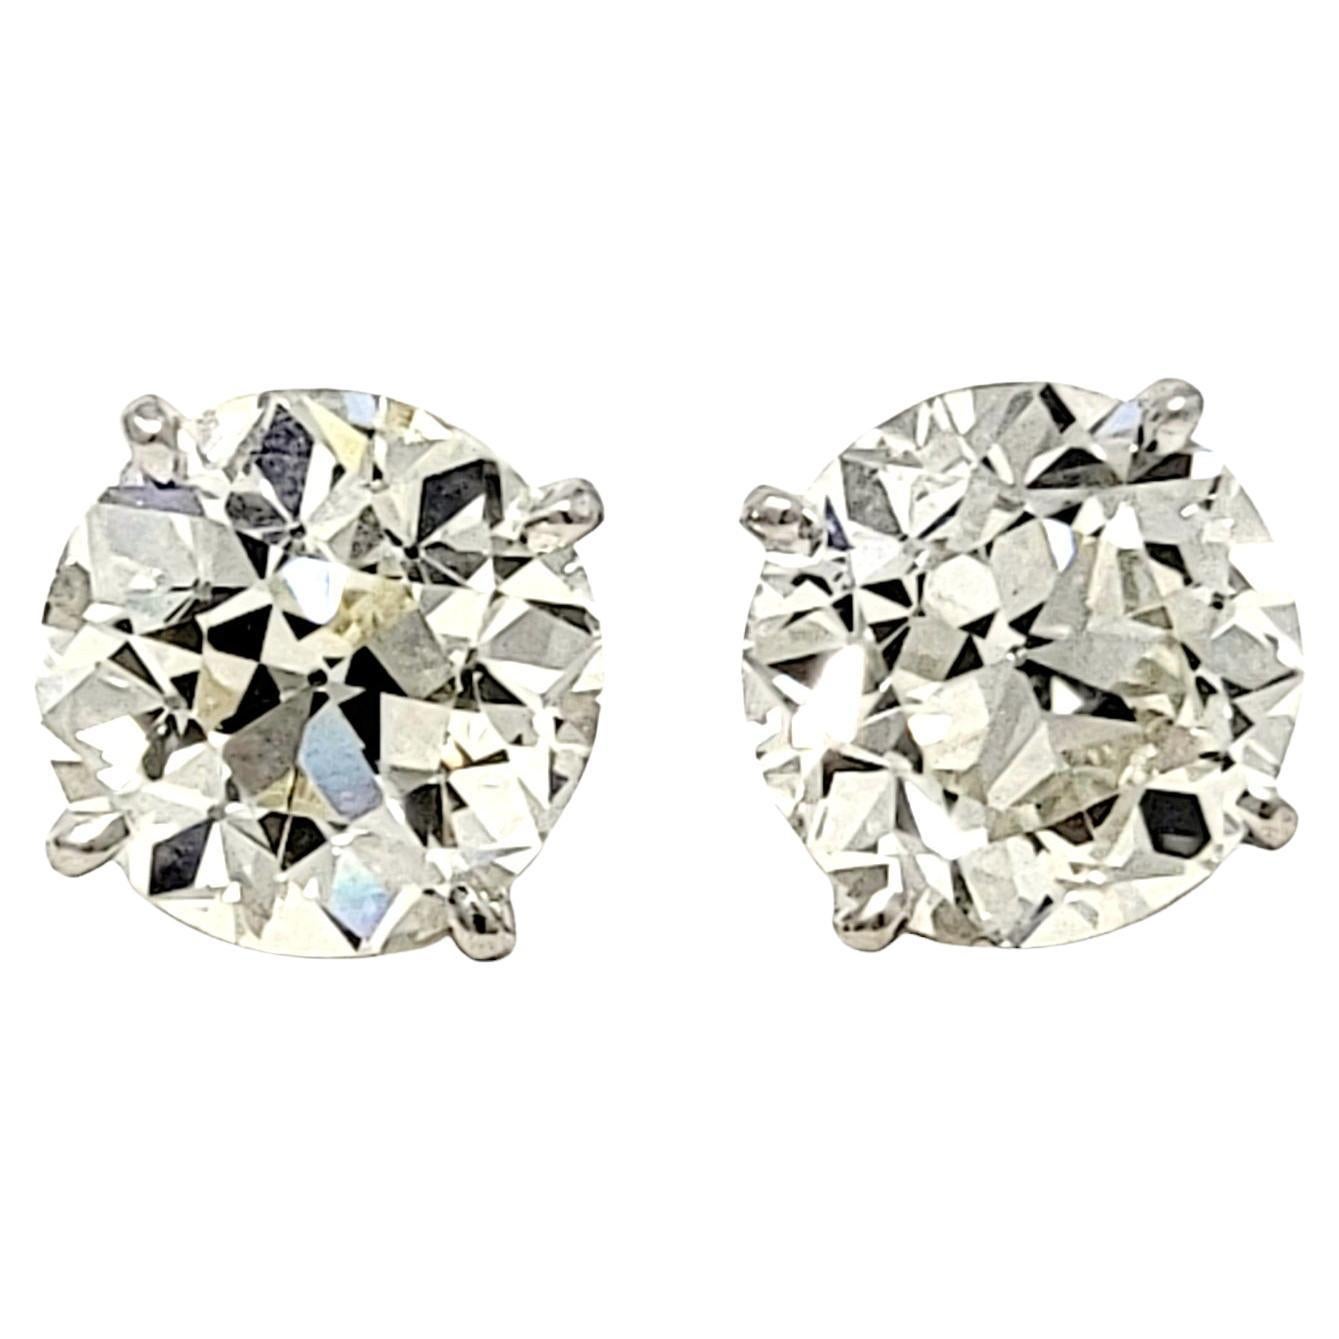 2.80 Carats Total Early Modern Brilliant Solitaire Diamond Stud Earrings in Gold